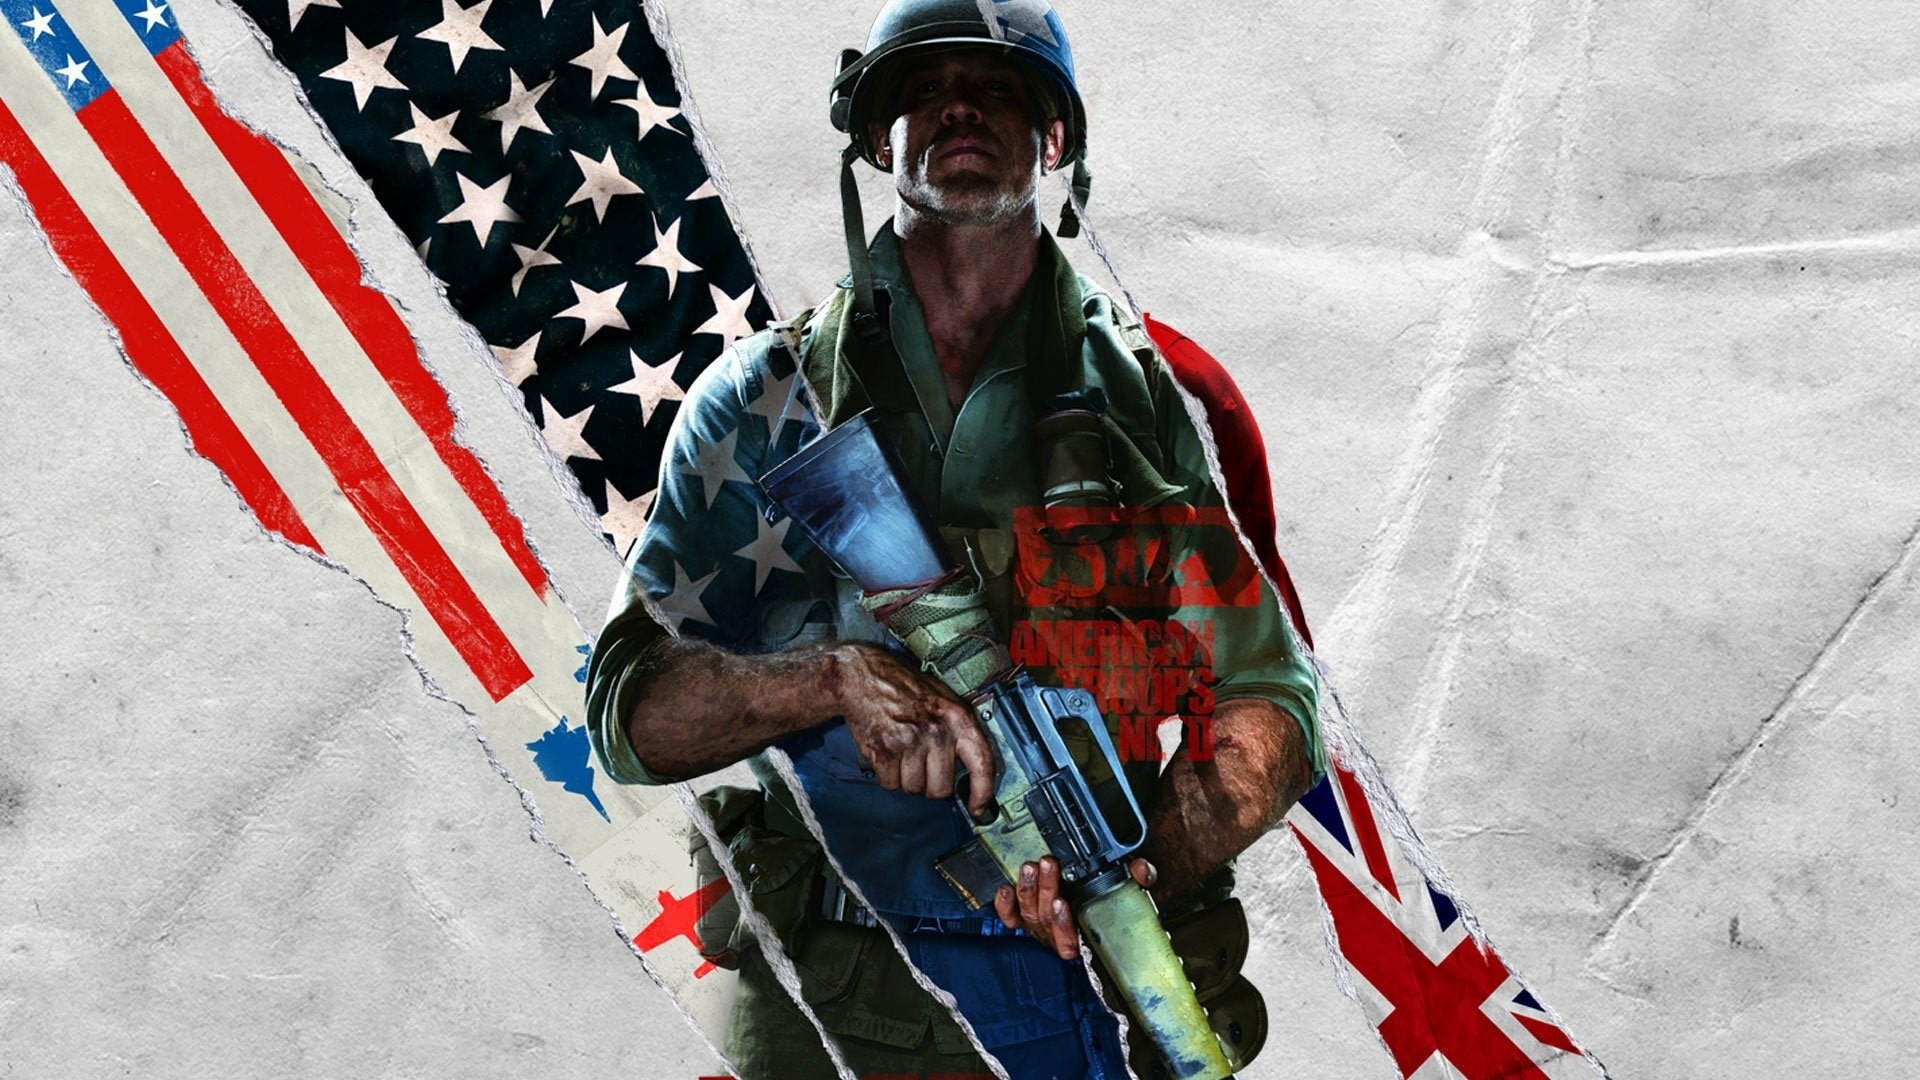 call of duty cold war zombies wallpaper